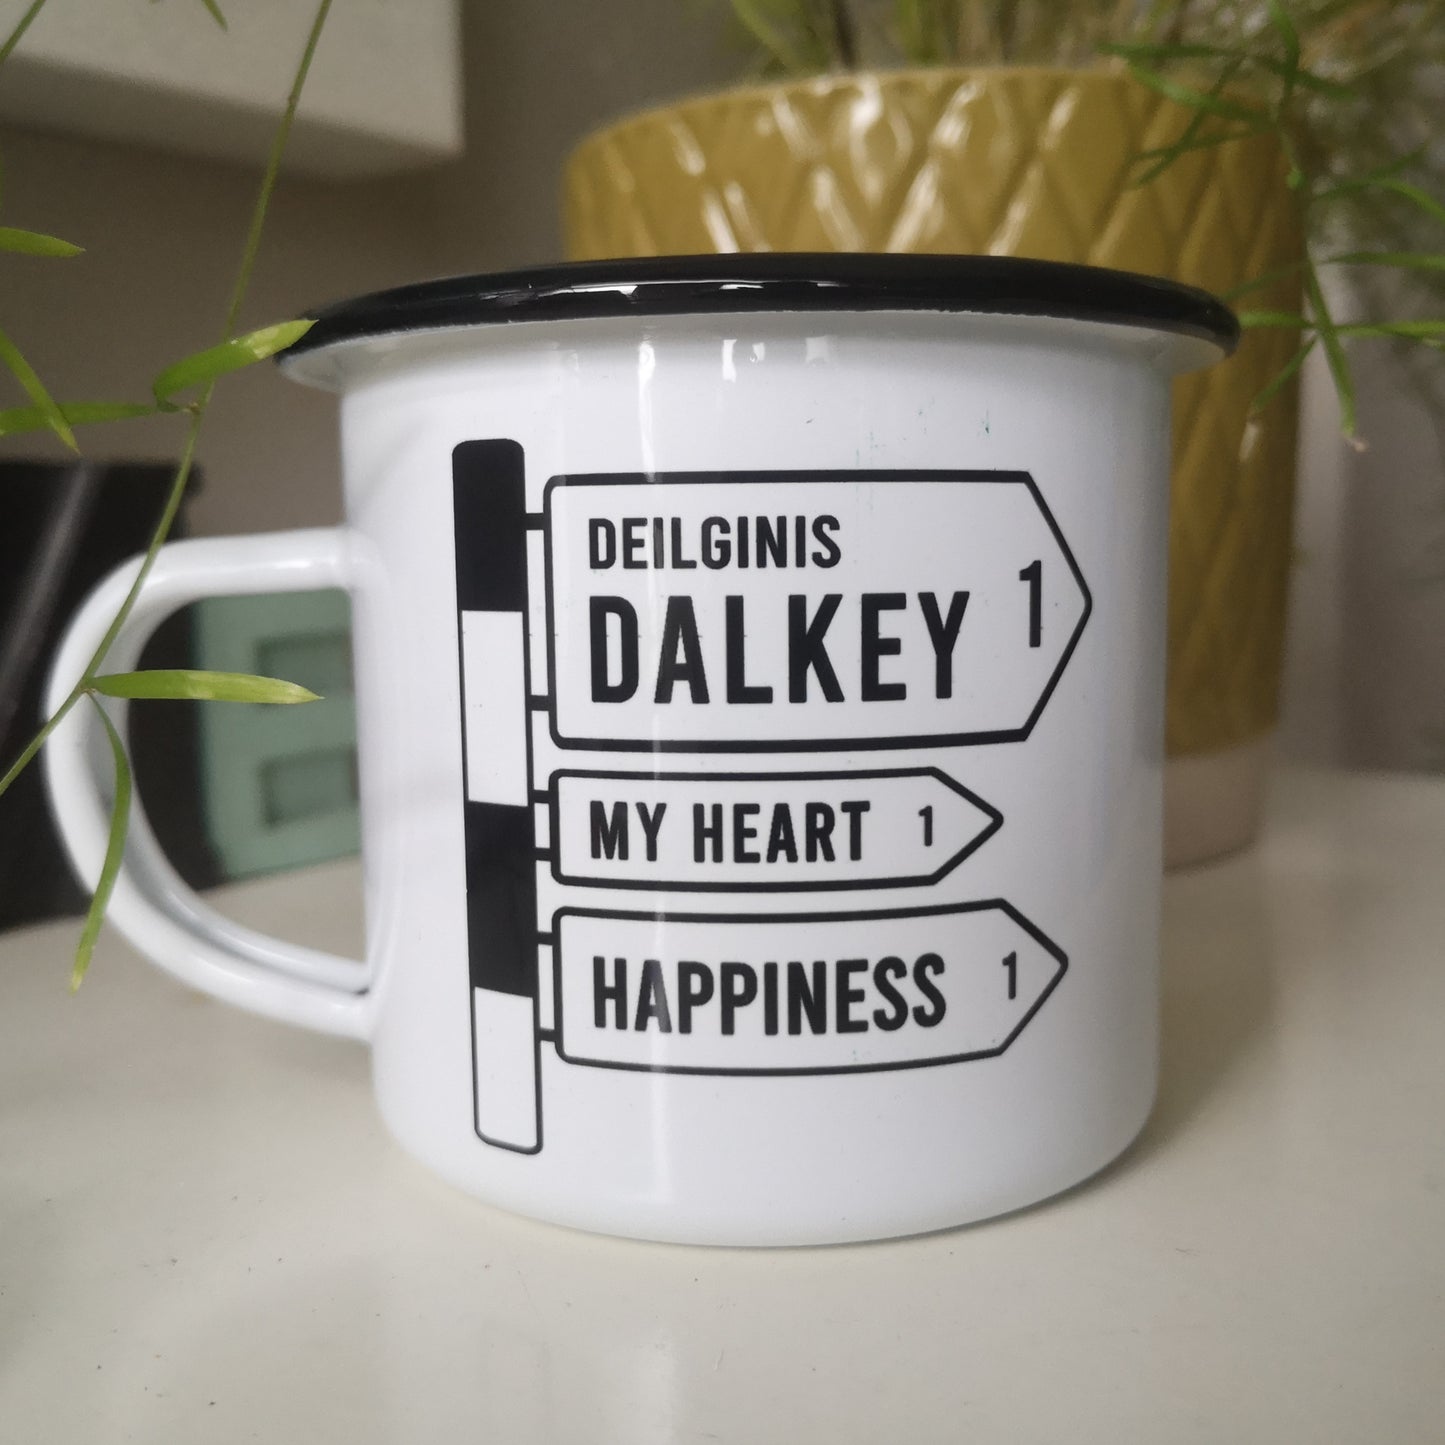 A Customised white steel enamel mug with your selected placename on it in an old fashioned black and white irish roadsign